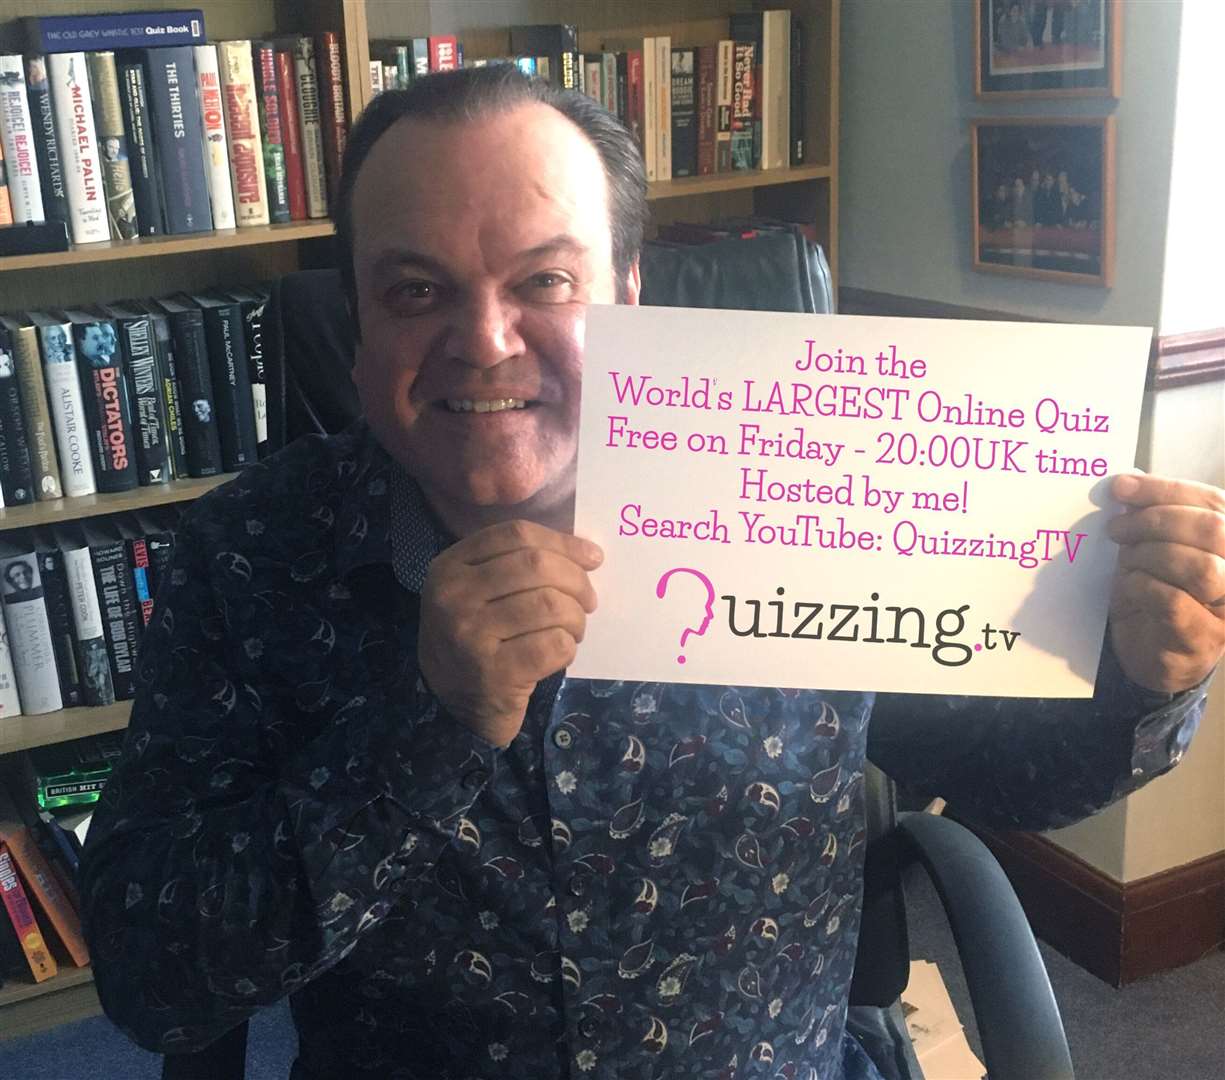 Shaun Williamson is quizmaster for what's been dubbed the World's Largest Online Quiz